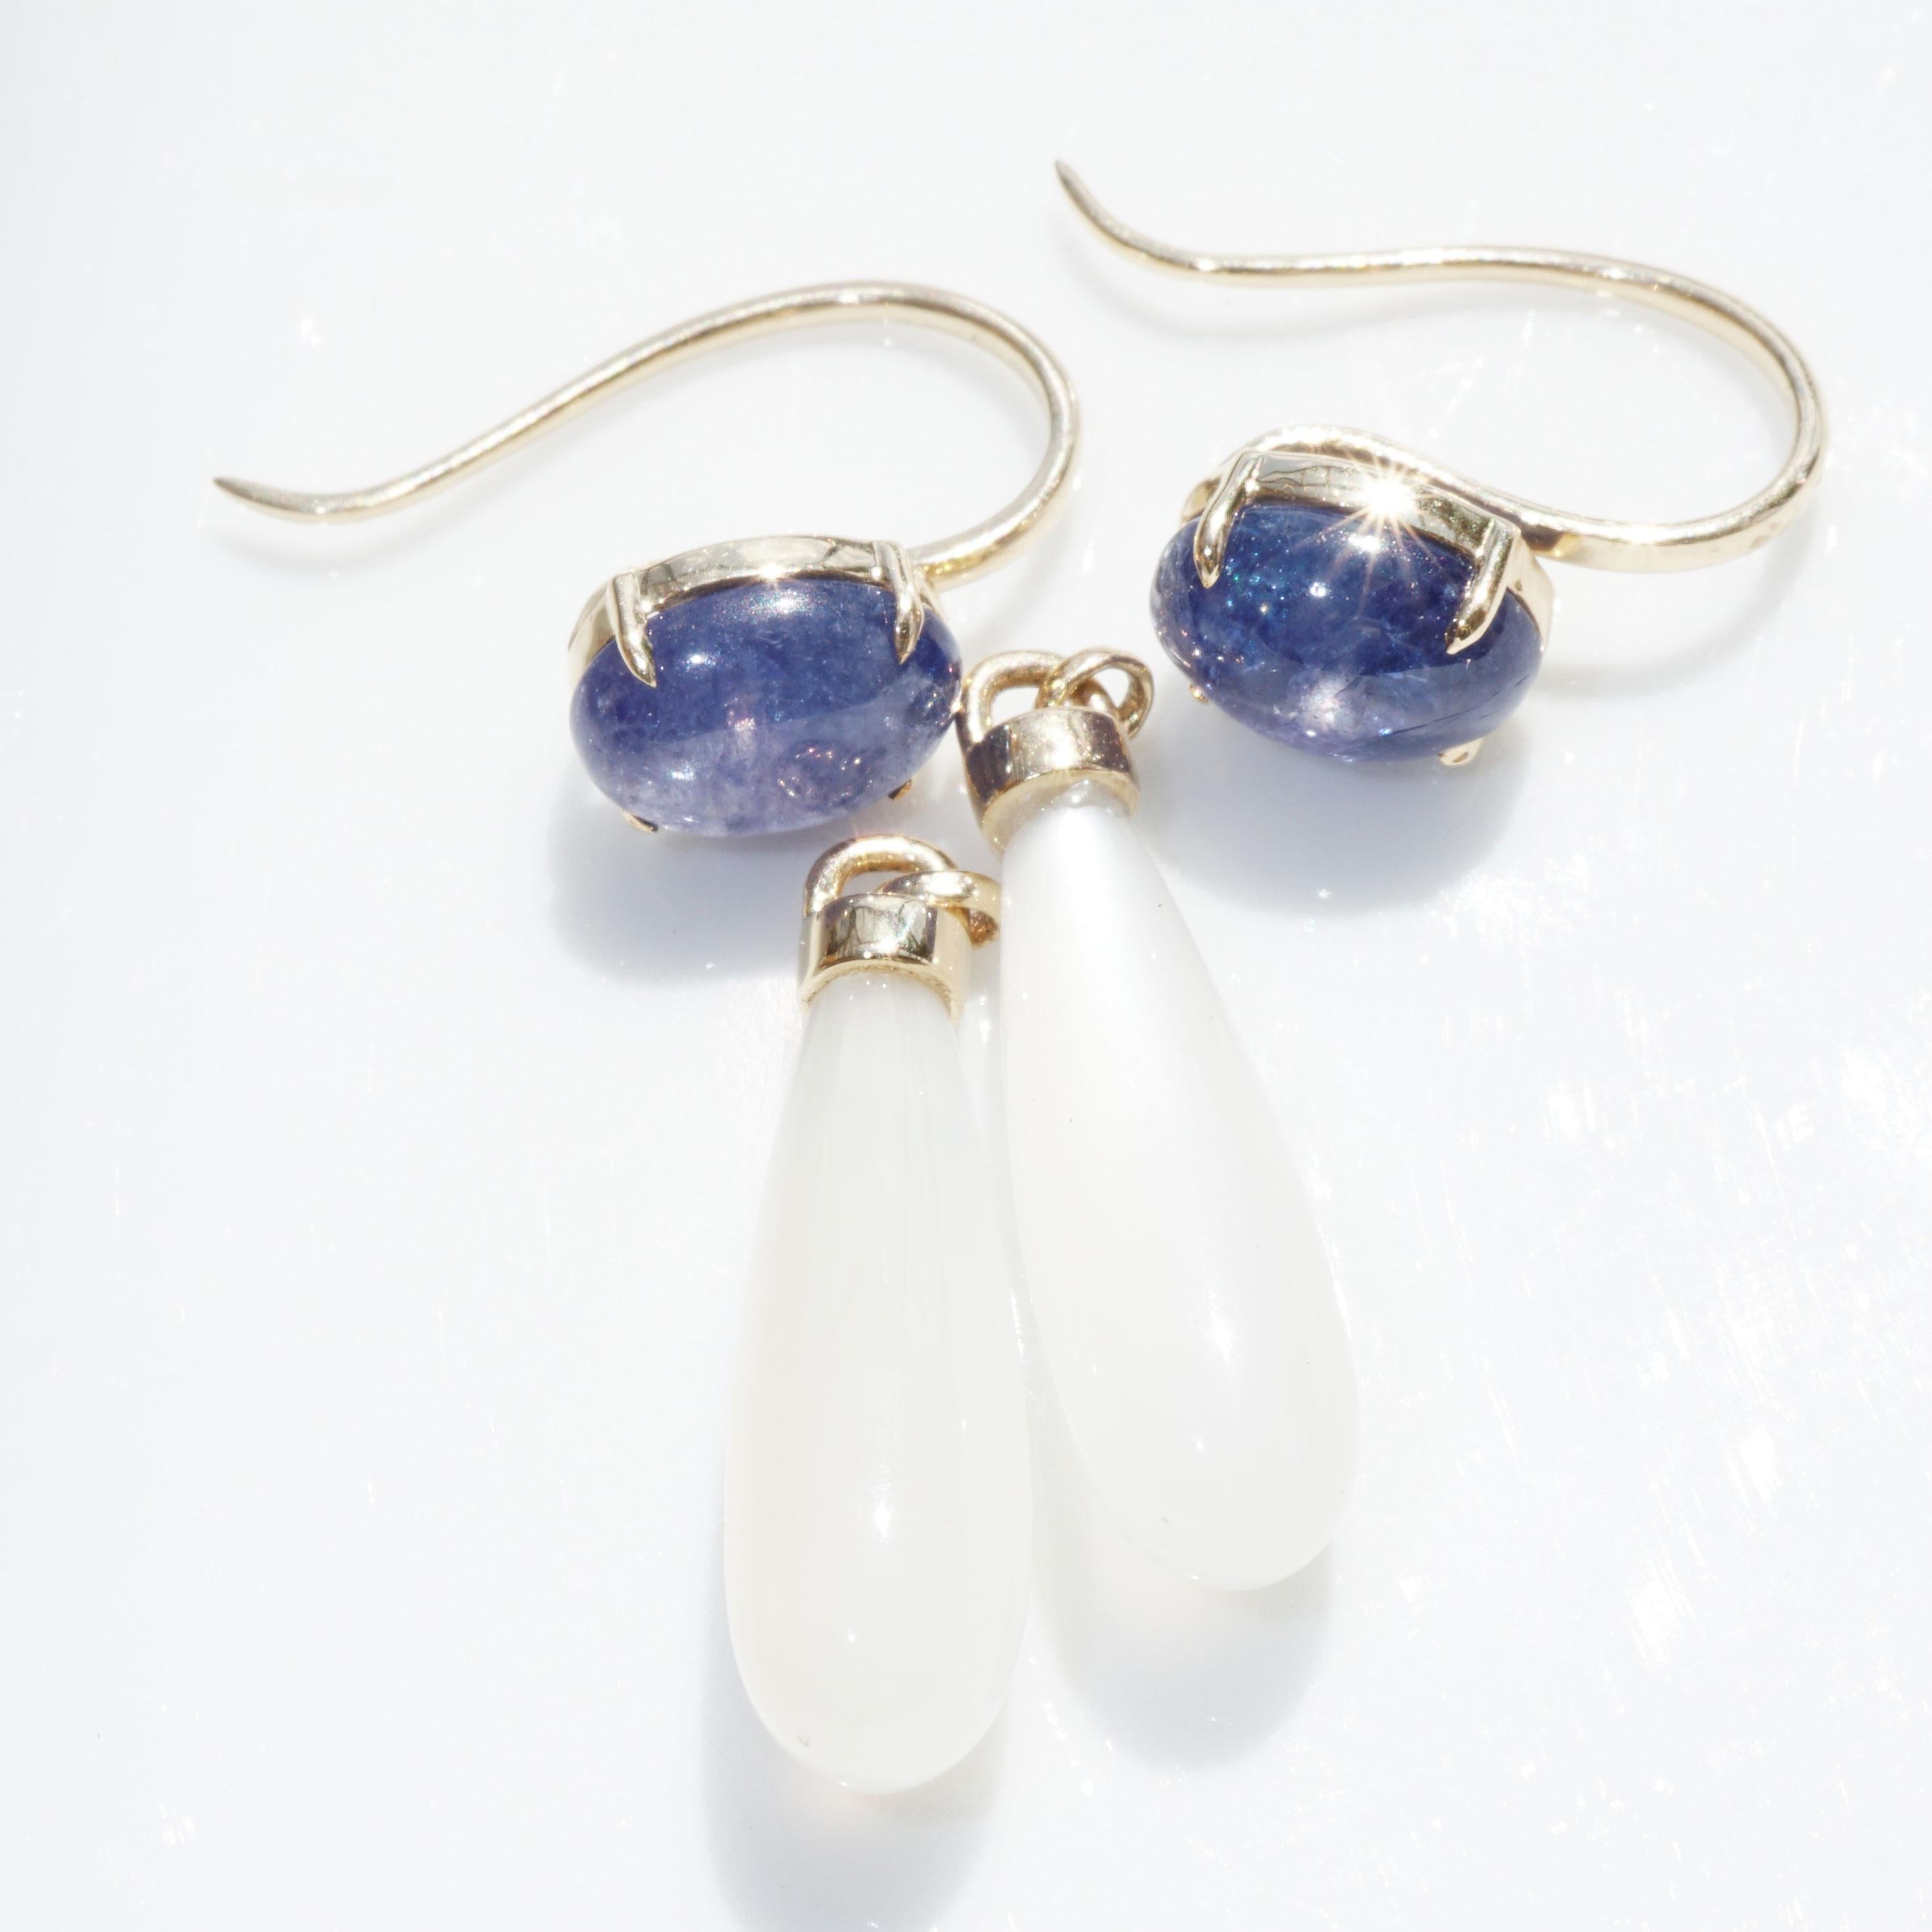 exquisite gemstones with great color combinations, inspired by Ole Lynggard who design great ear jewelry, white moonstone pampels in fine quality total ca. 14.33 ct, AAA, in addition as a colorful contrast bright blue-violet tanzanite cabochons